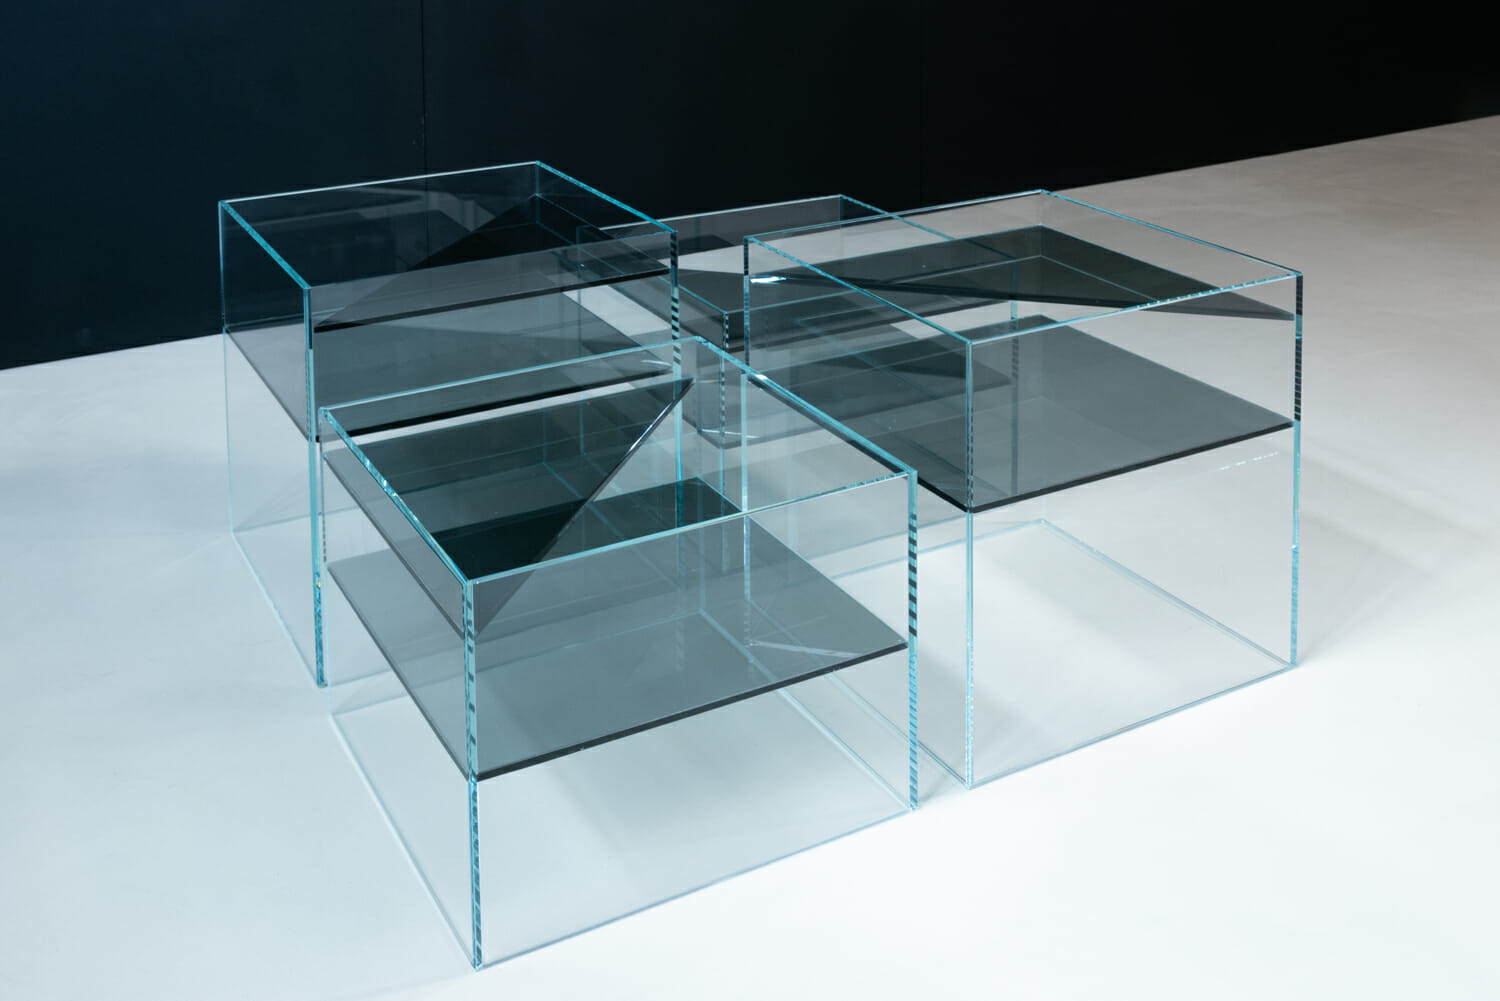 High End Glass Furniture Company: How to Spot the Differences in the